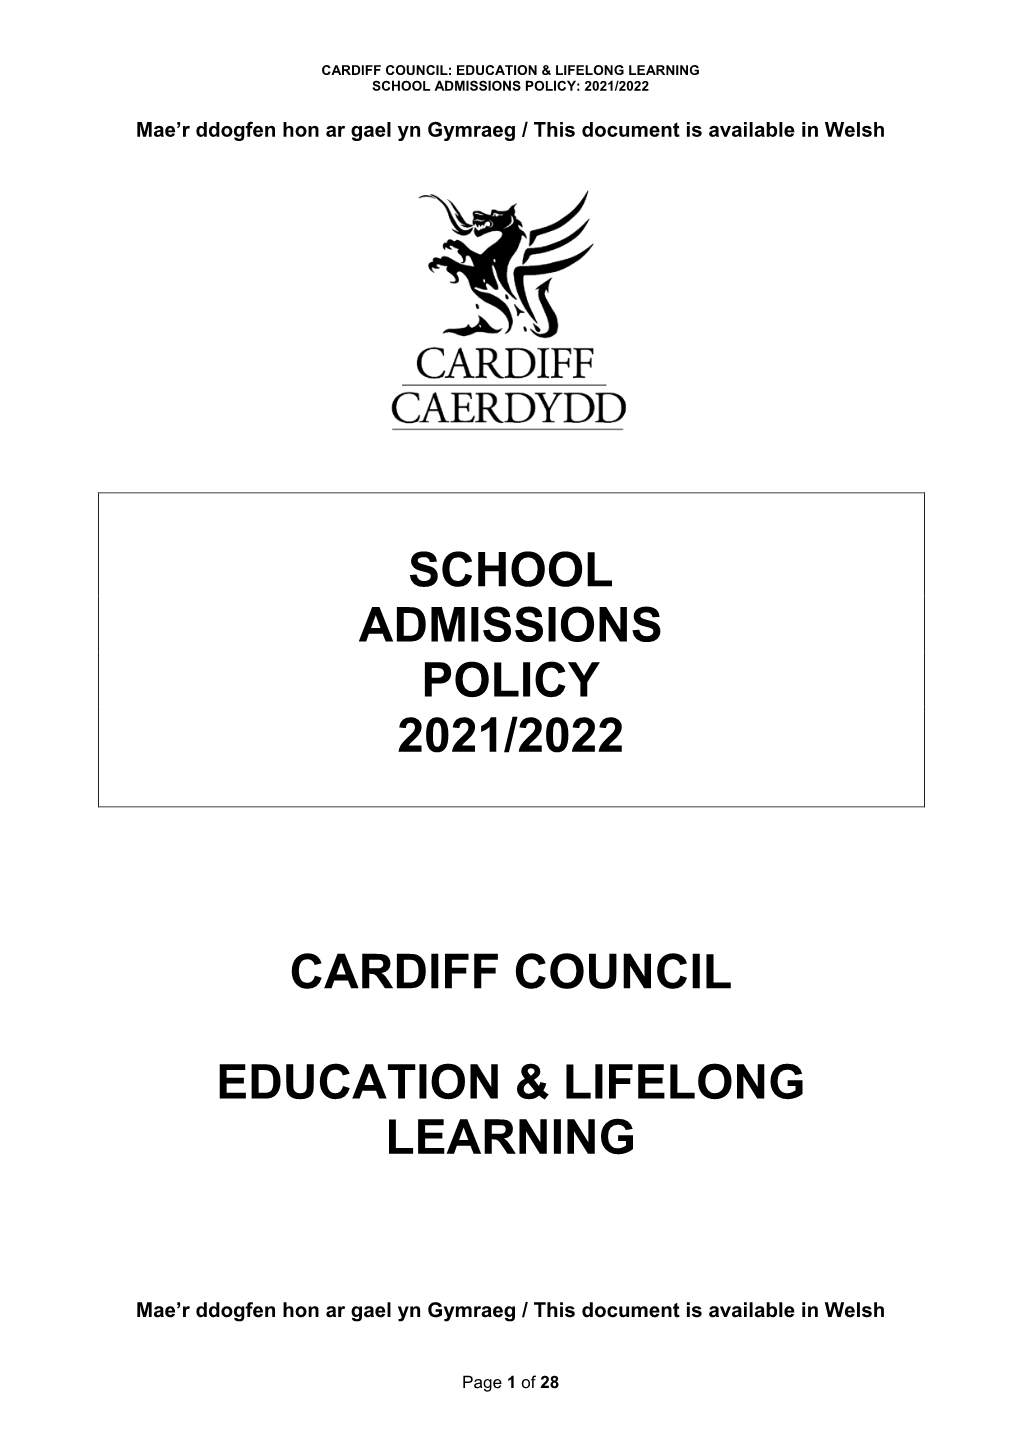 School Admissions Policy 2021/2022 Cardiff Council Education & Lifelong